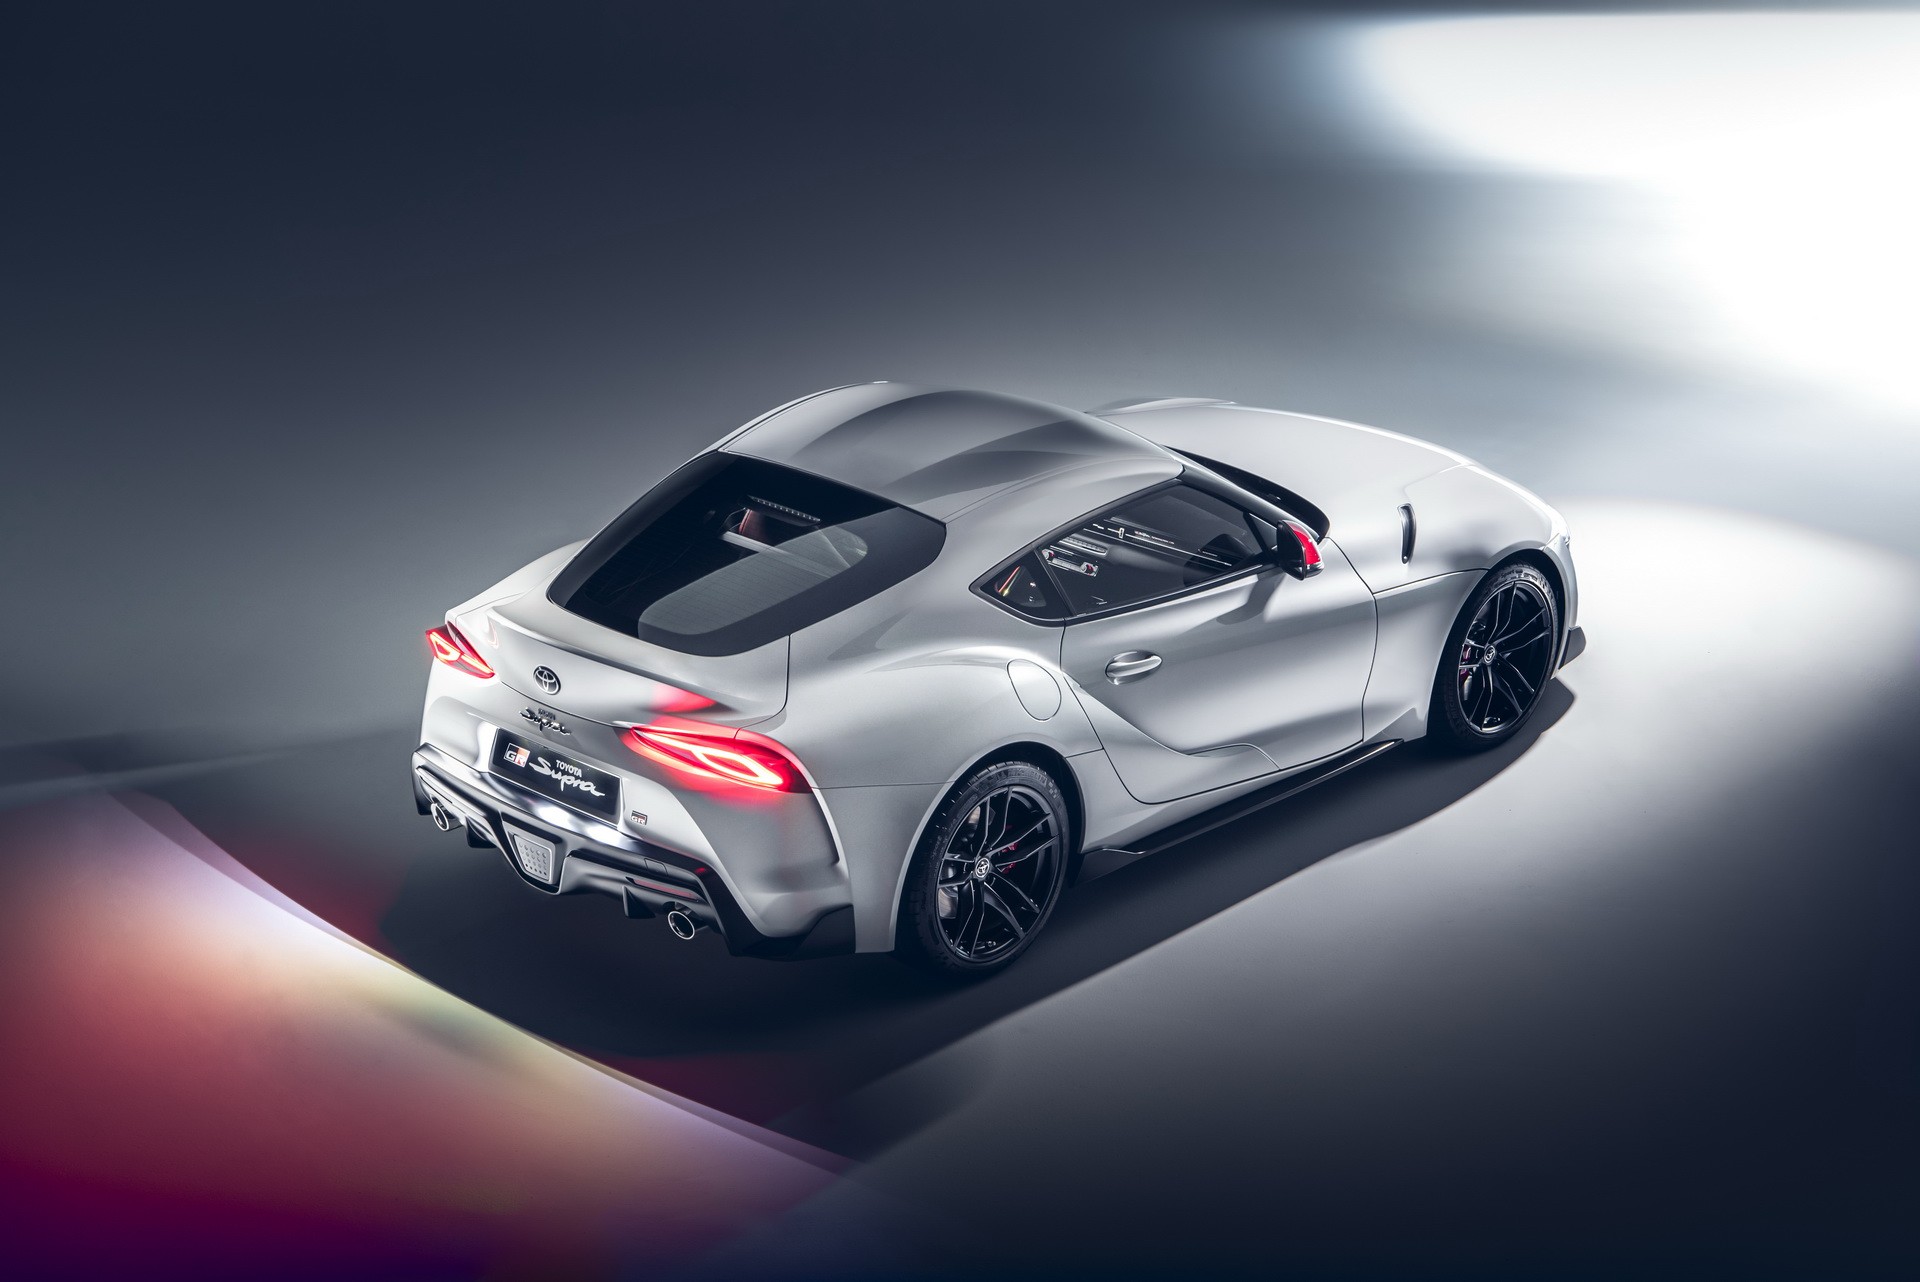 2020 toyota gr supra with turbo 20 liter engine now available in europe 6